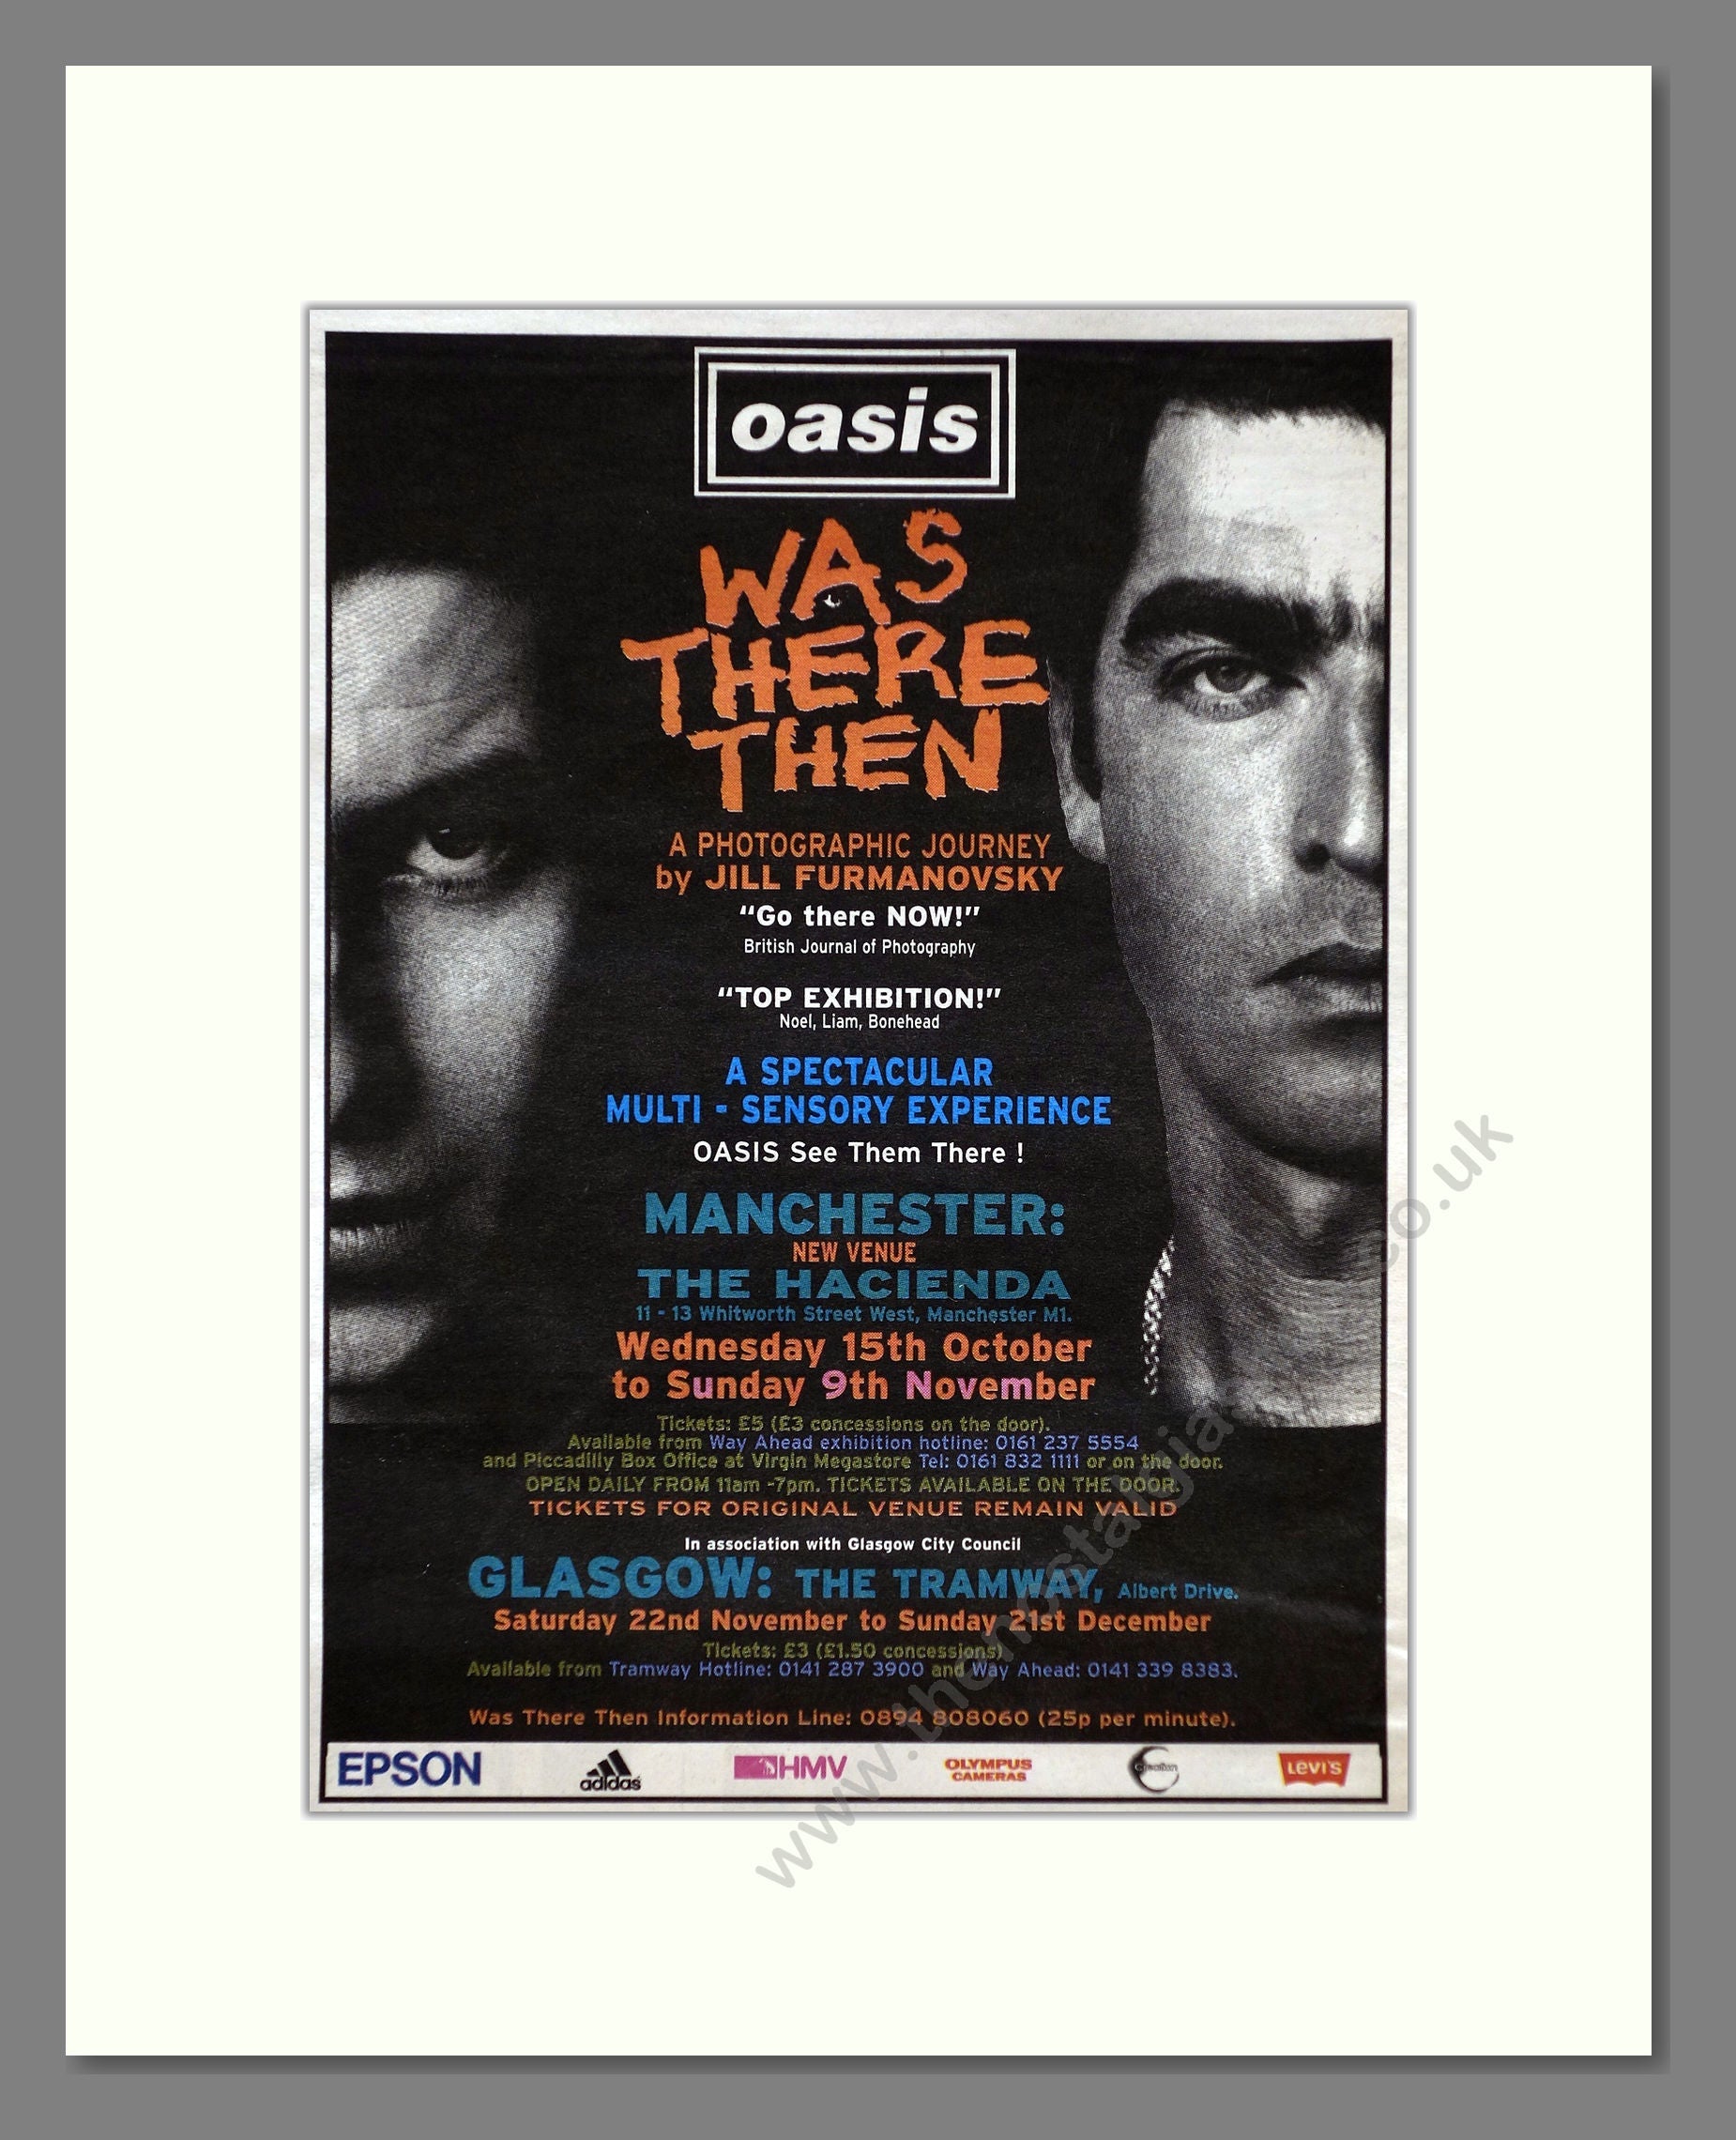 Oasis - Was There Then. Vintage Advert 1997 (ref AD62116)